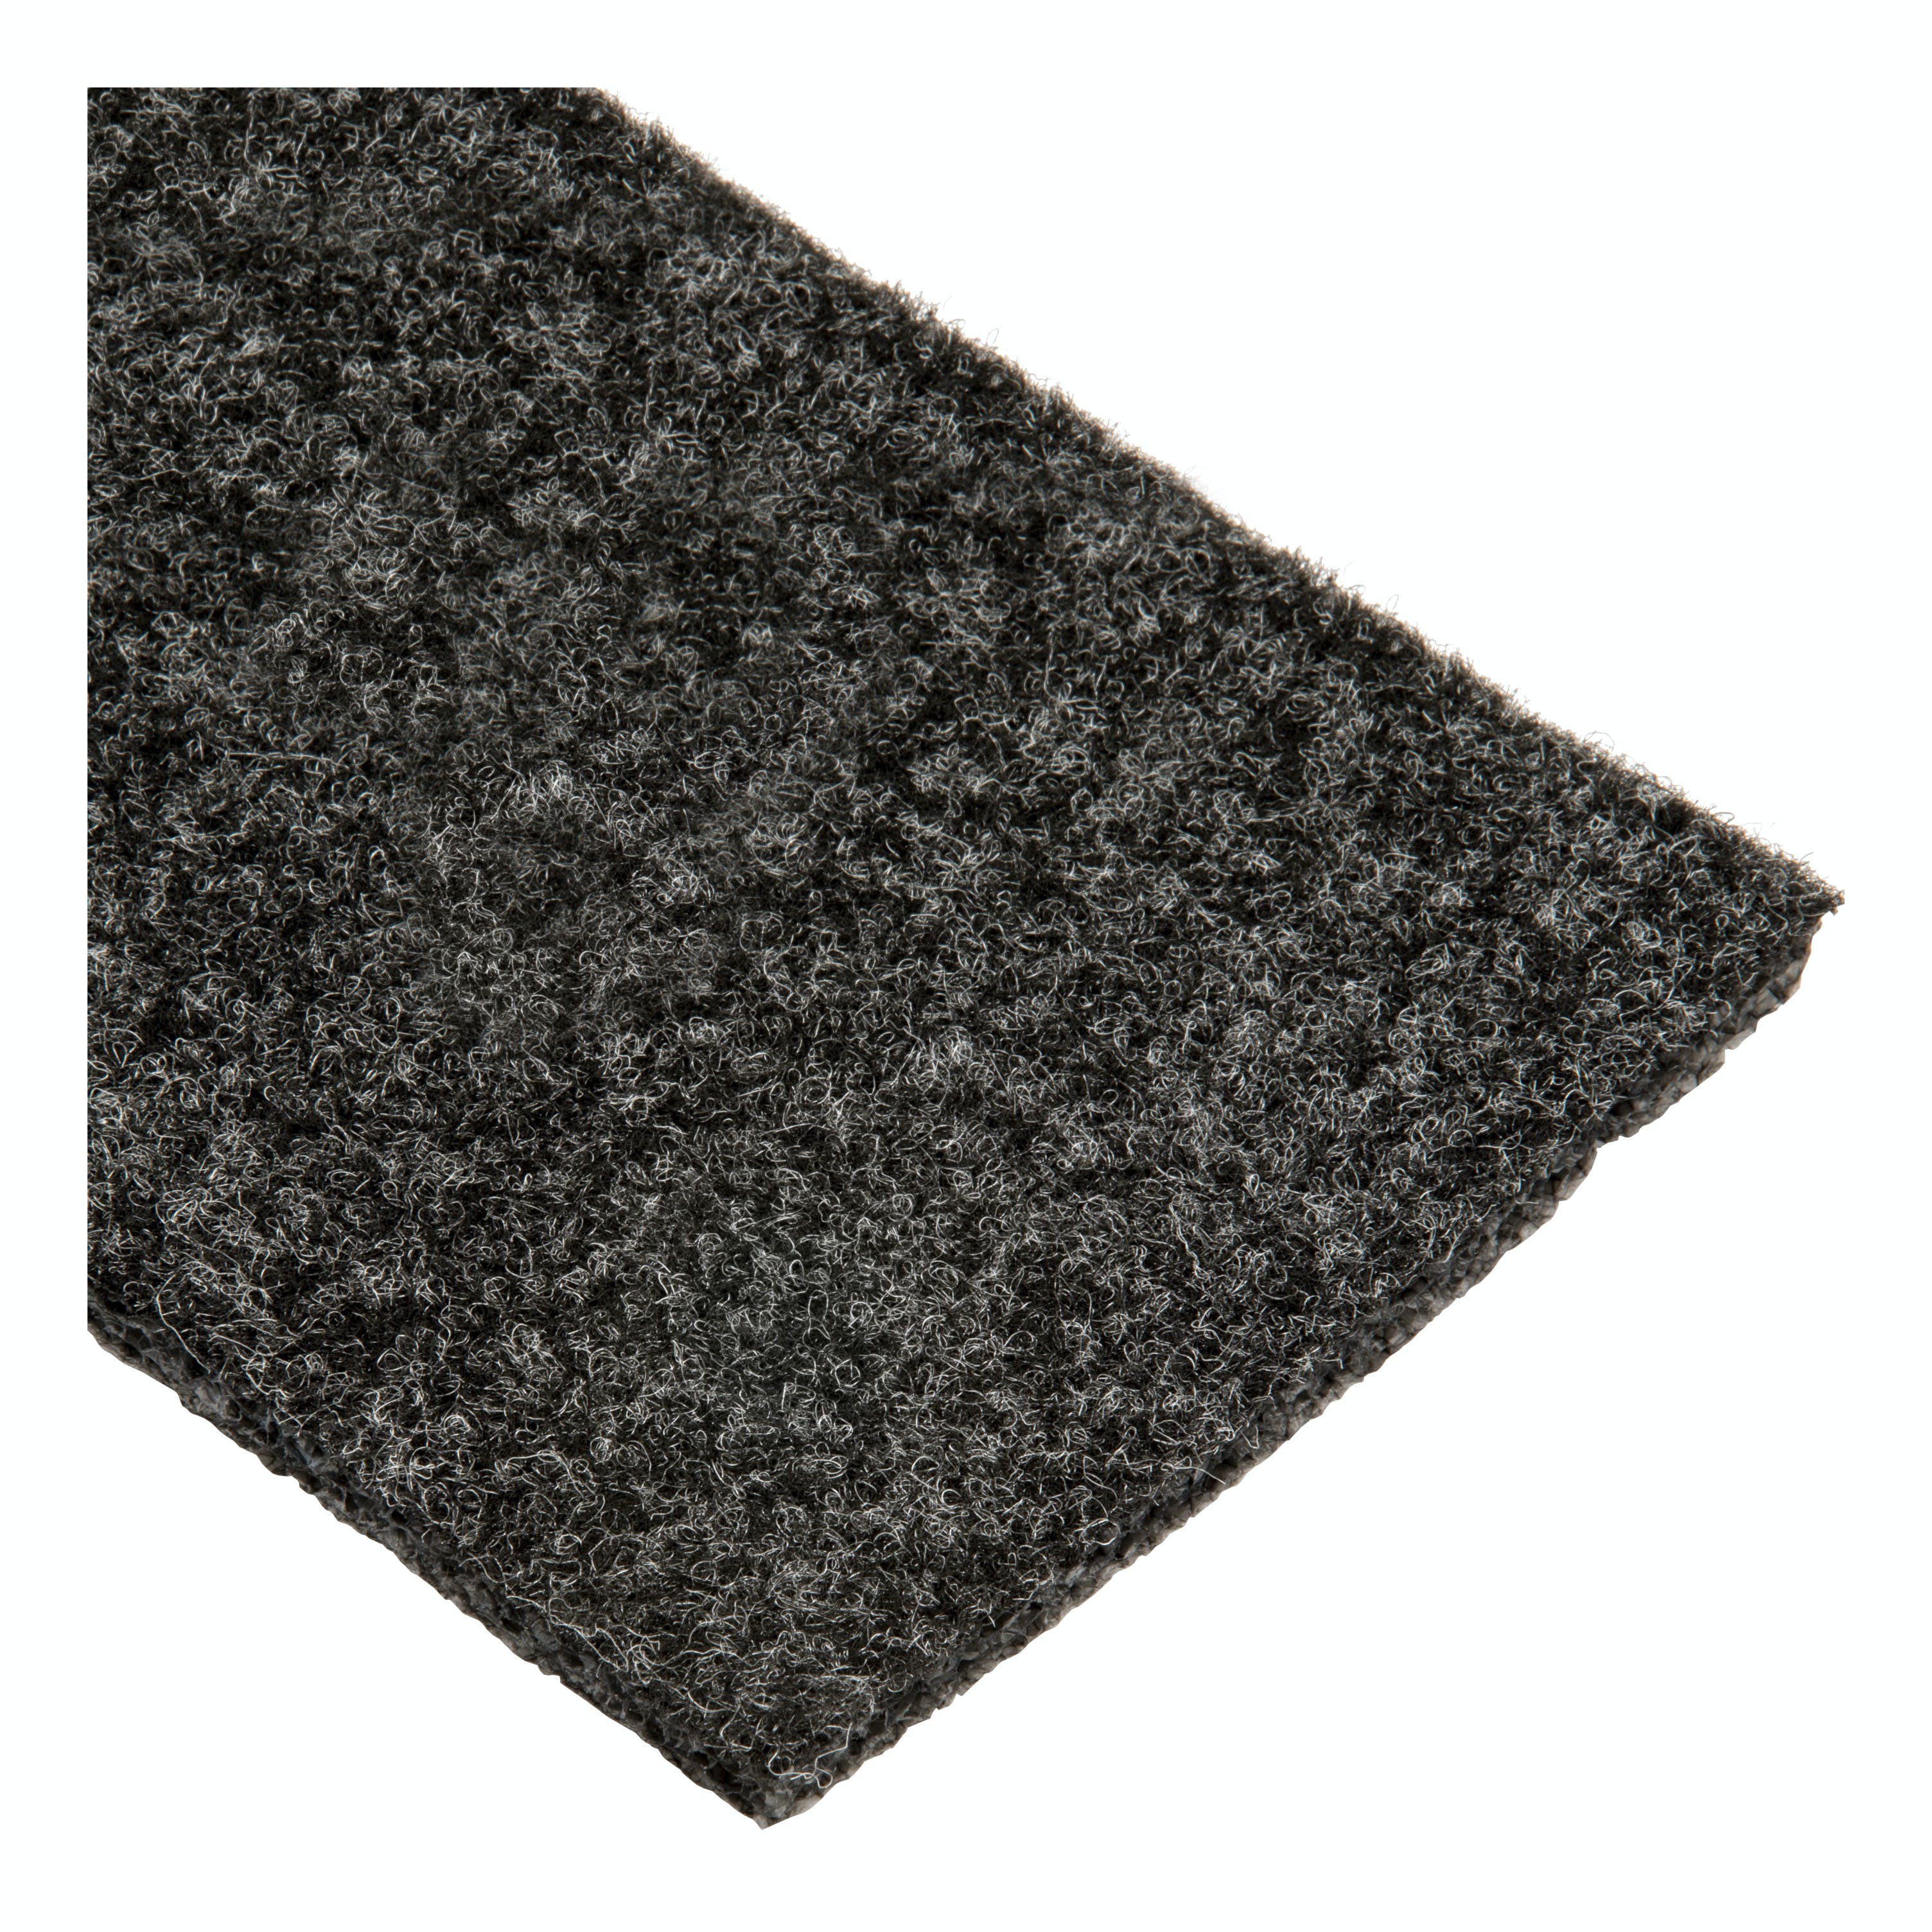 UWS UWS-BL72 Replacement BedRug Carpet Liner for Standard 72 inch Truck Tool Box